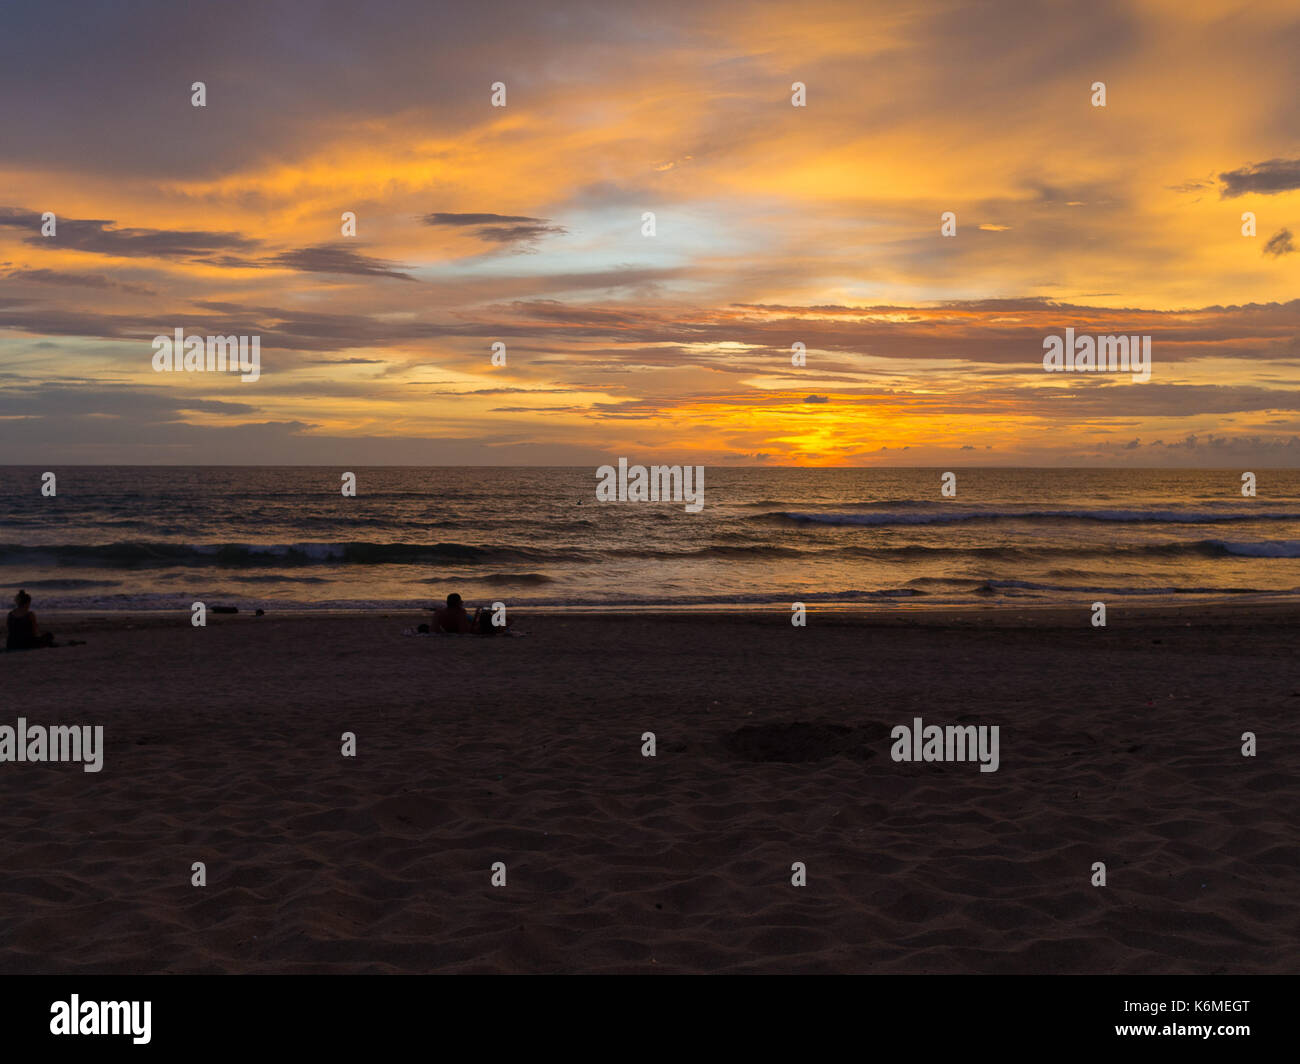 Sunset with clouds of different shapes. People make photos. Bali, Indonesia, Indian ocean Stock Photo